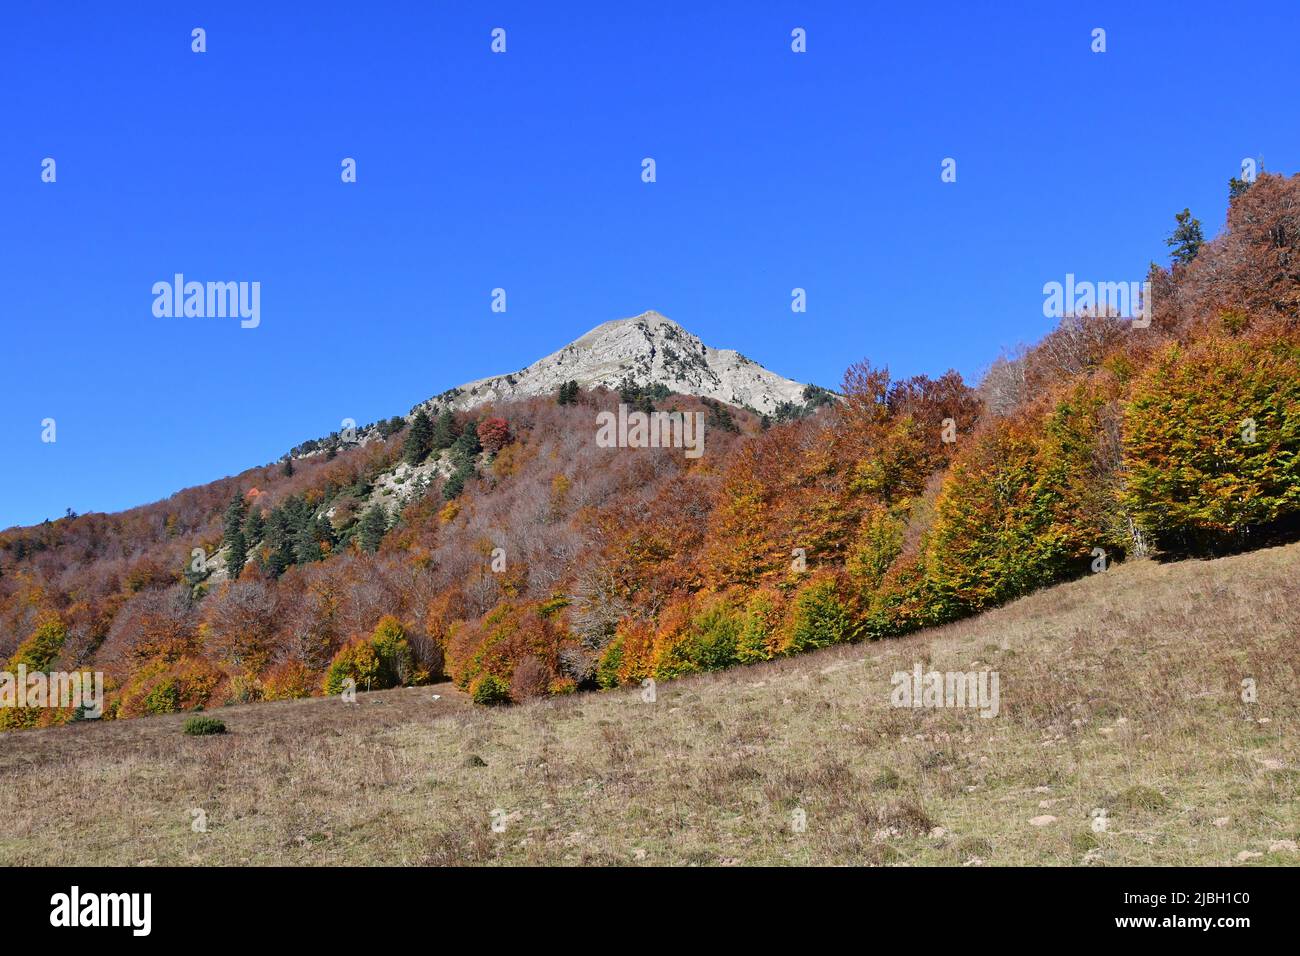 Gamueta forest in the Spain's Pyrenees, in the Anso Valley Stock Photo